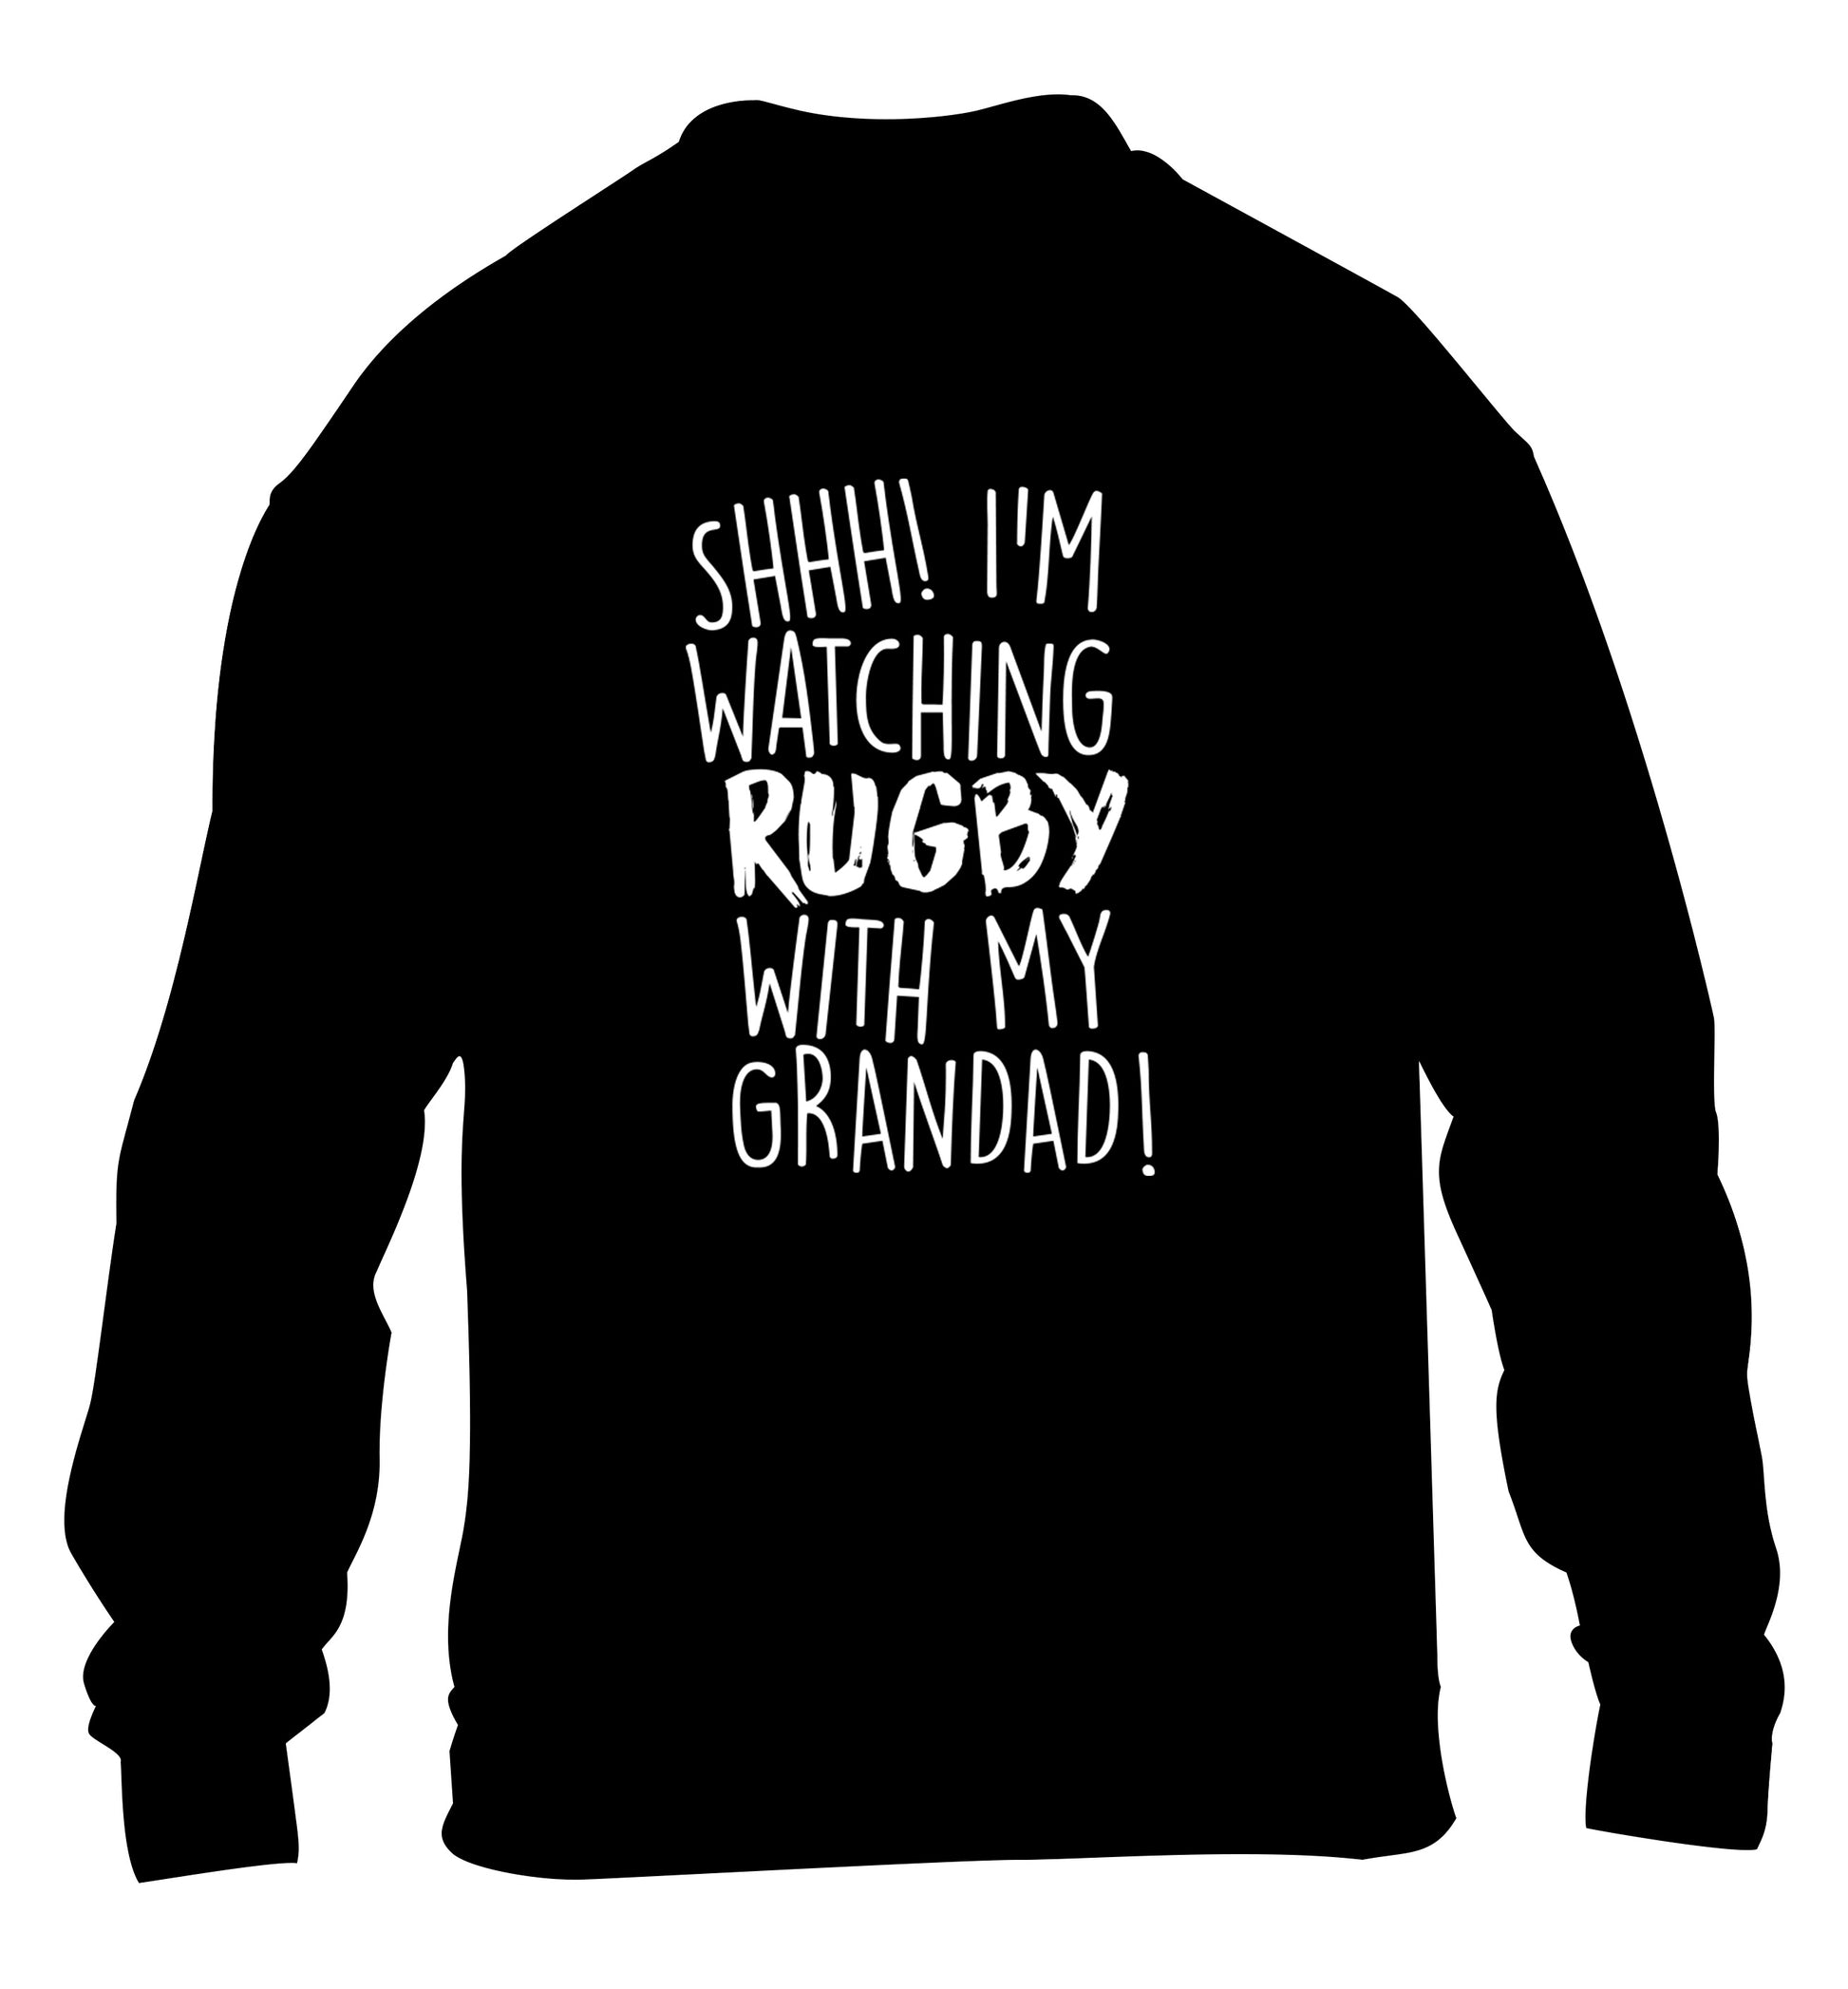 Shh I'm watching rugby with my grandaughter children's black sweater 12-13 Years